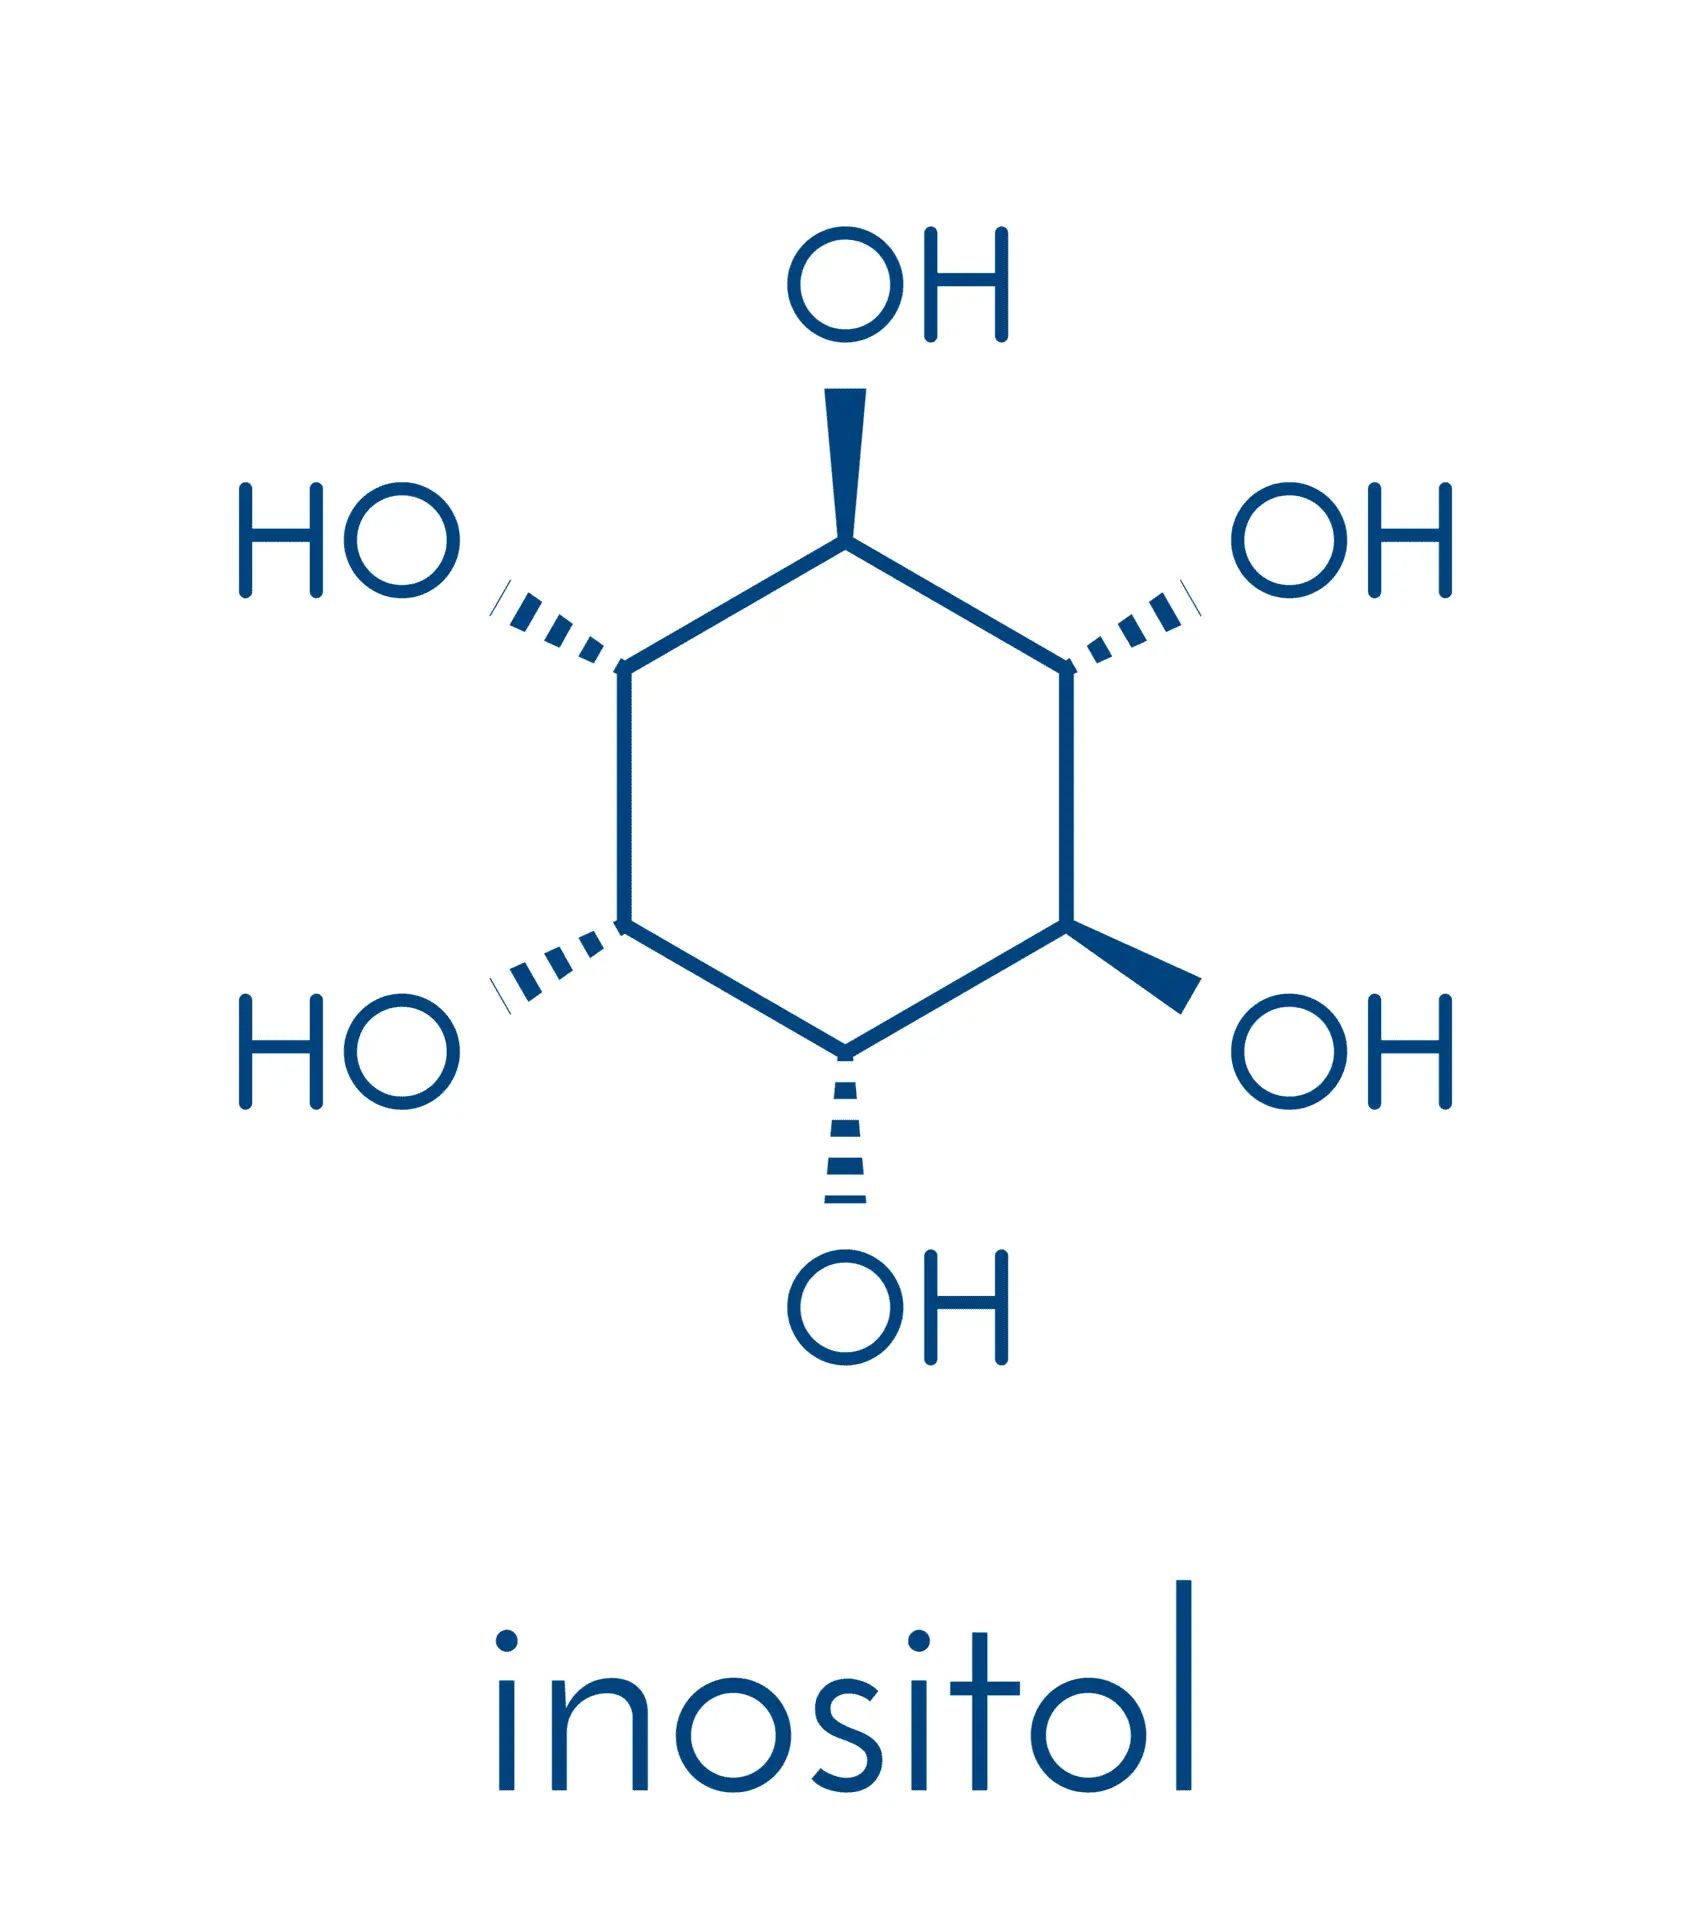 Chemical structure of inositol as a supplement for PCOS